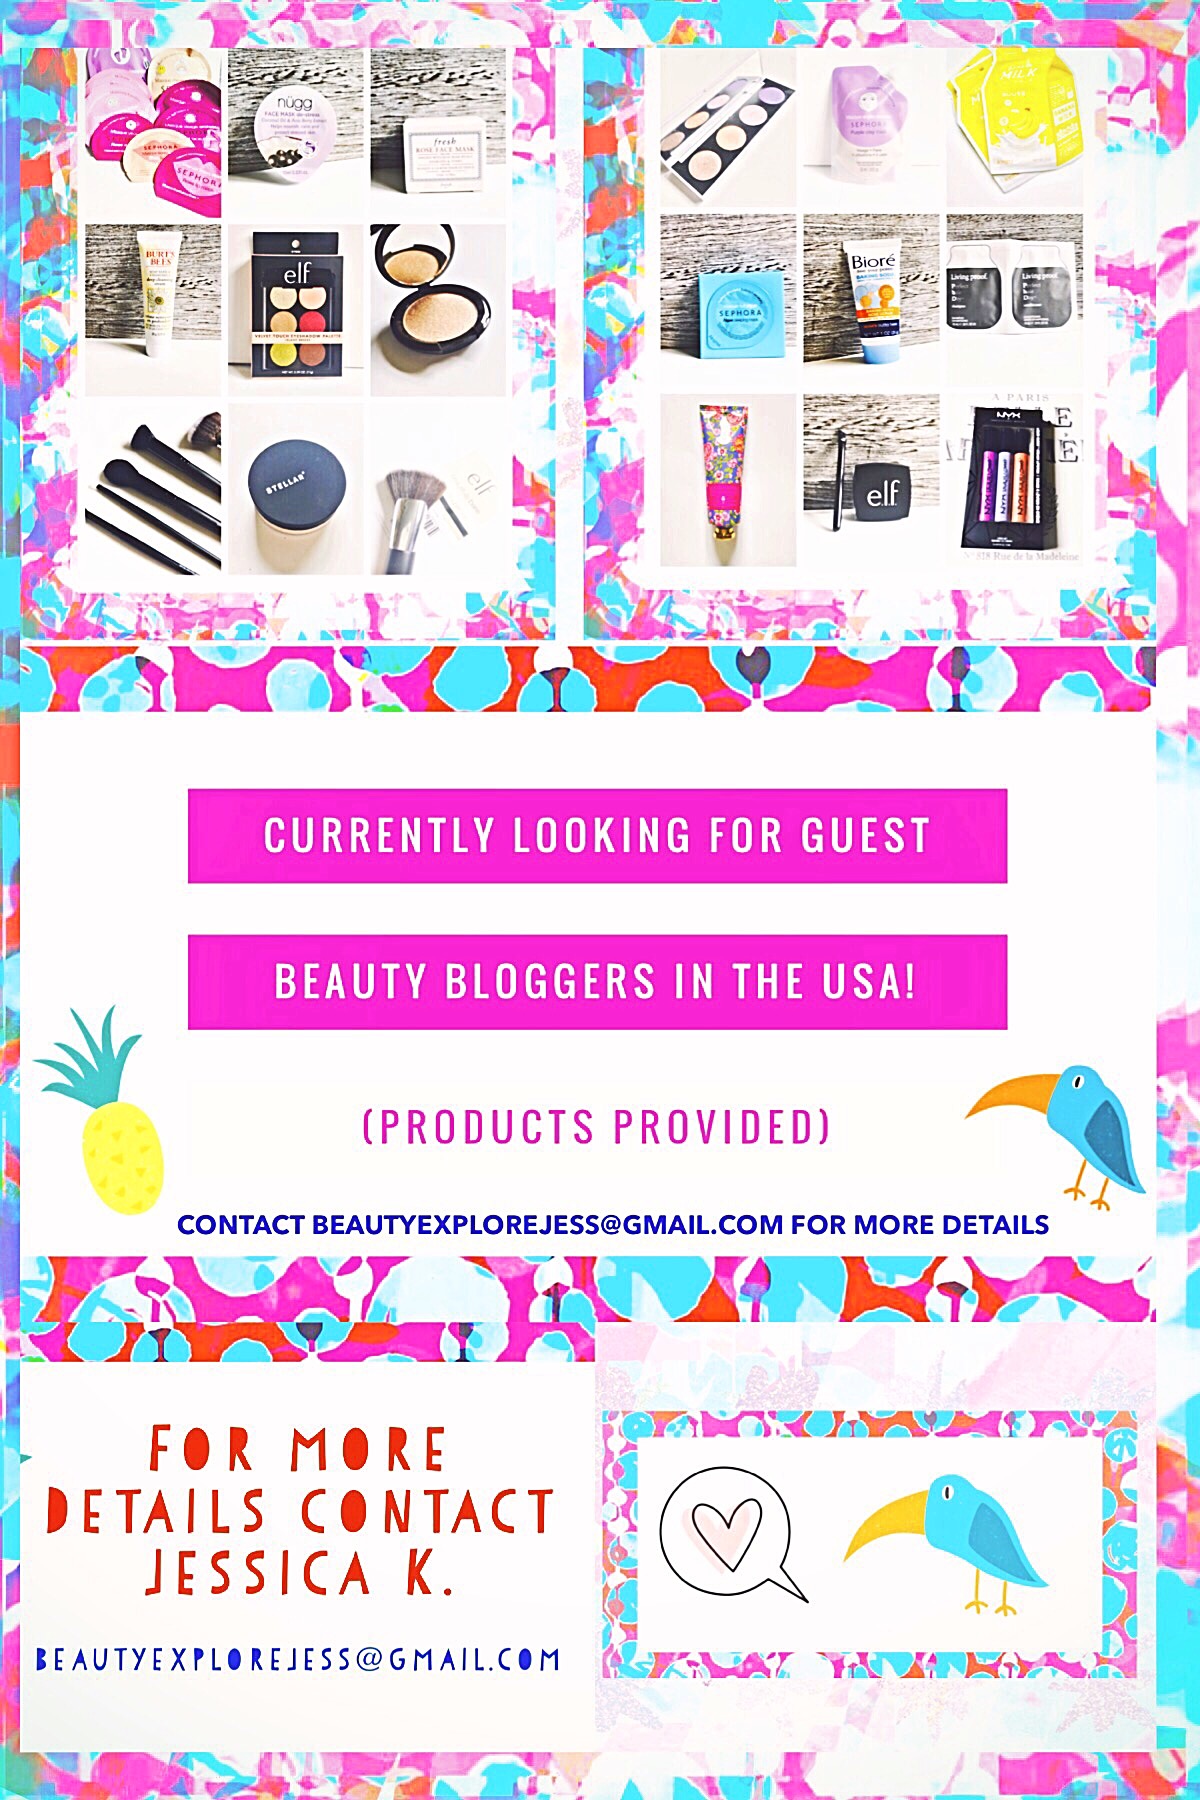 Looking for YOU! And other Guest Bloggers to Review Products for Beauty Explore Online!